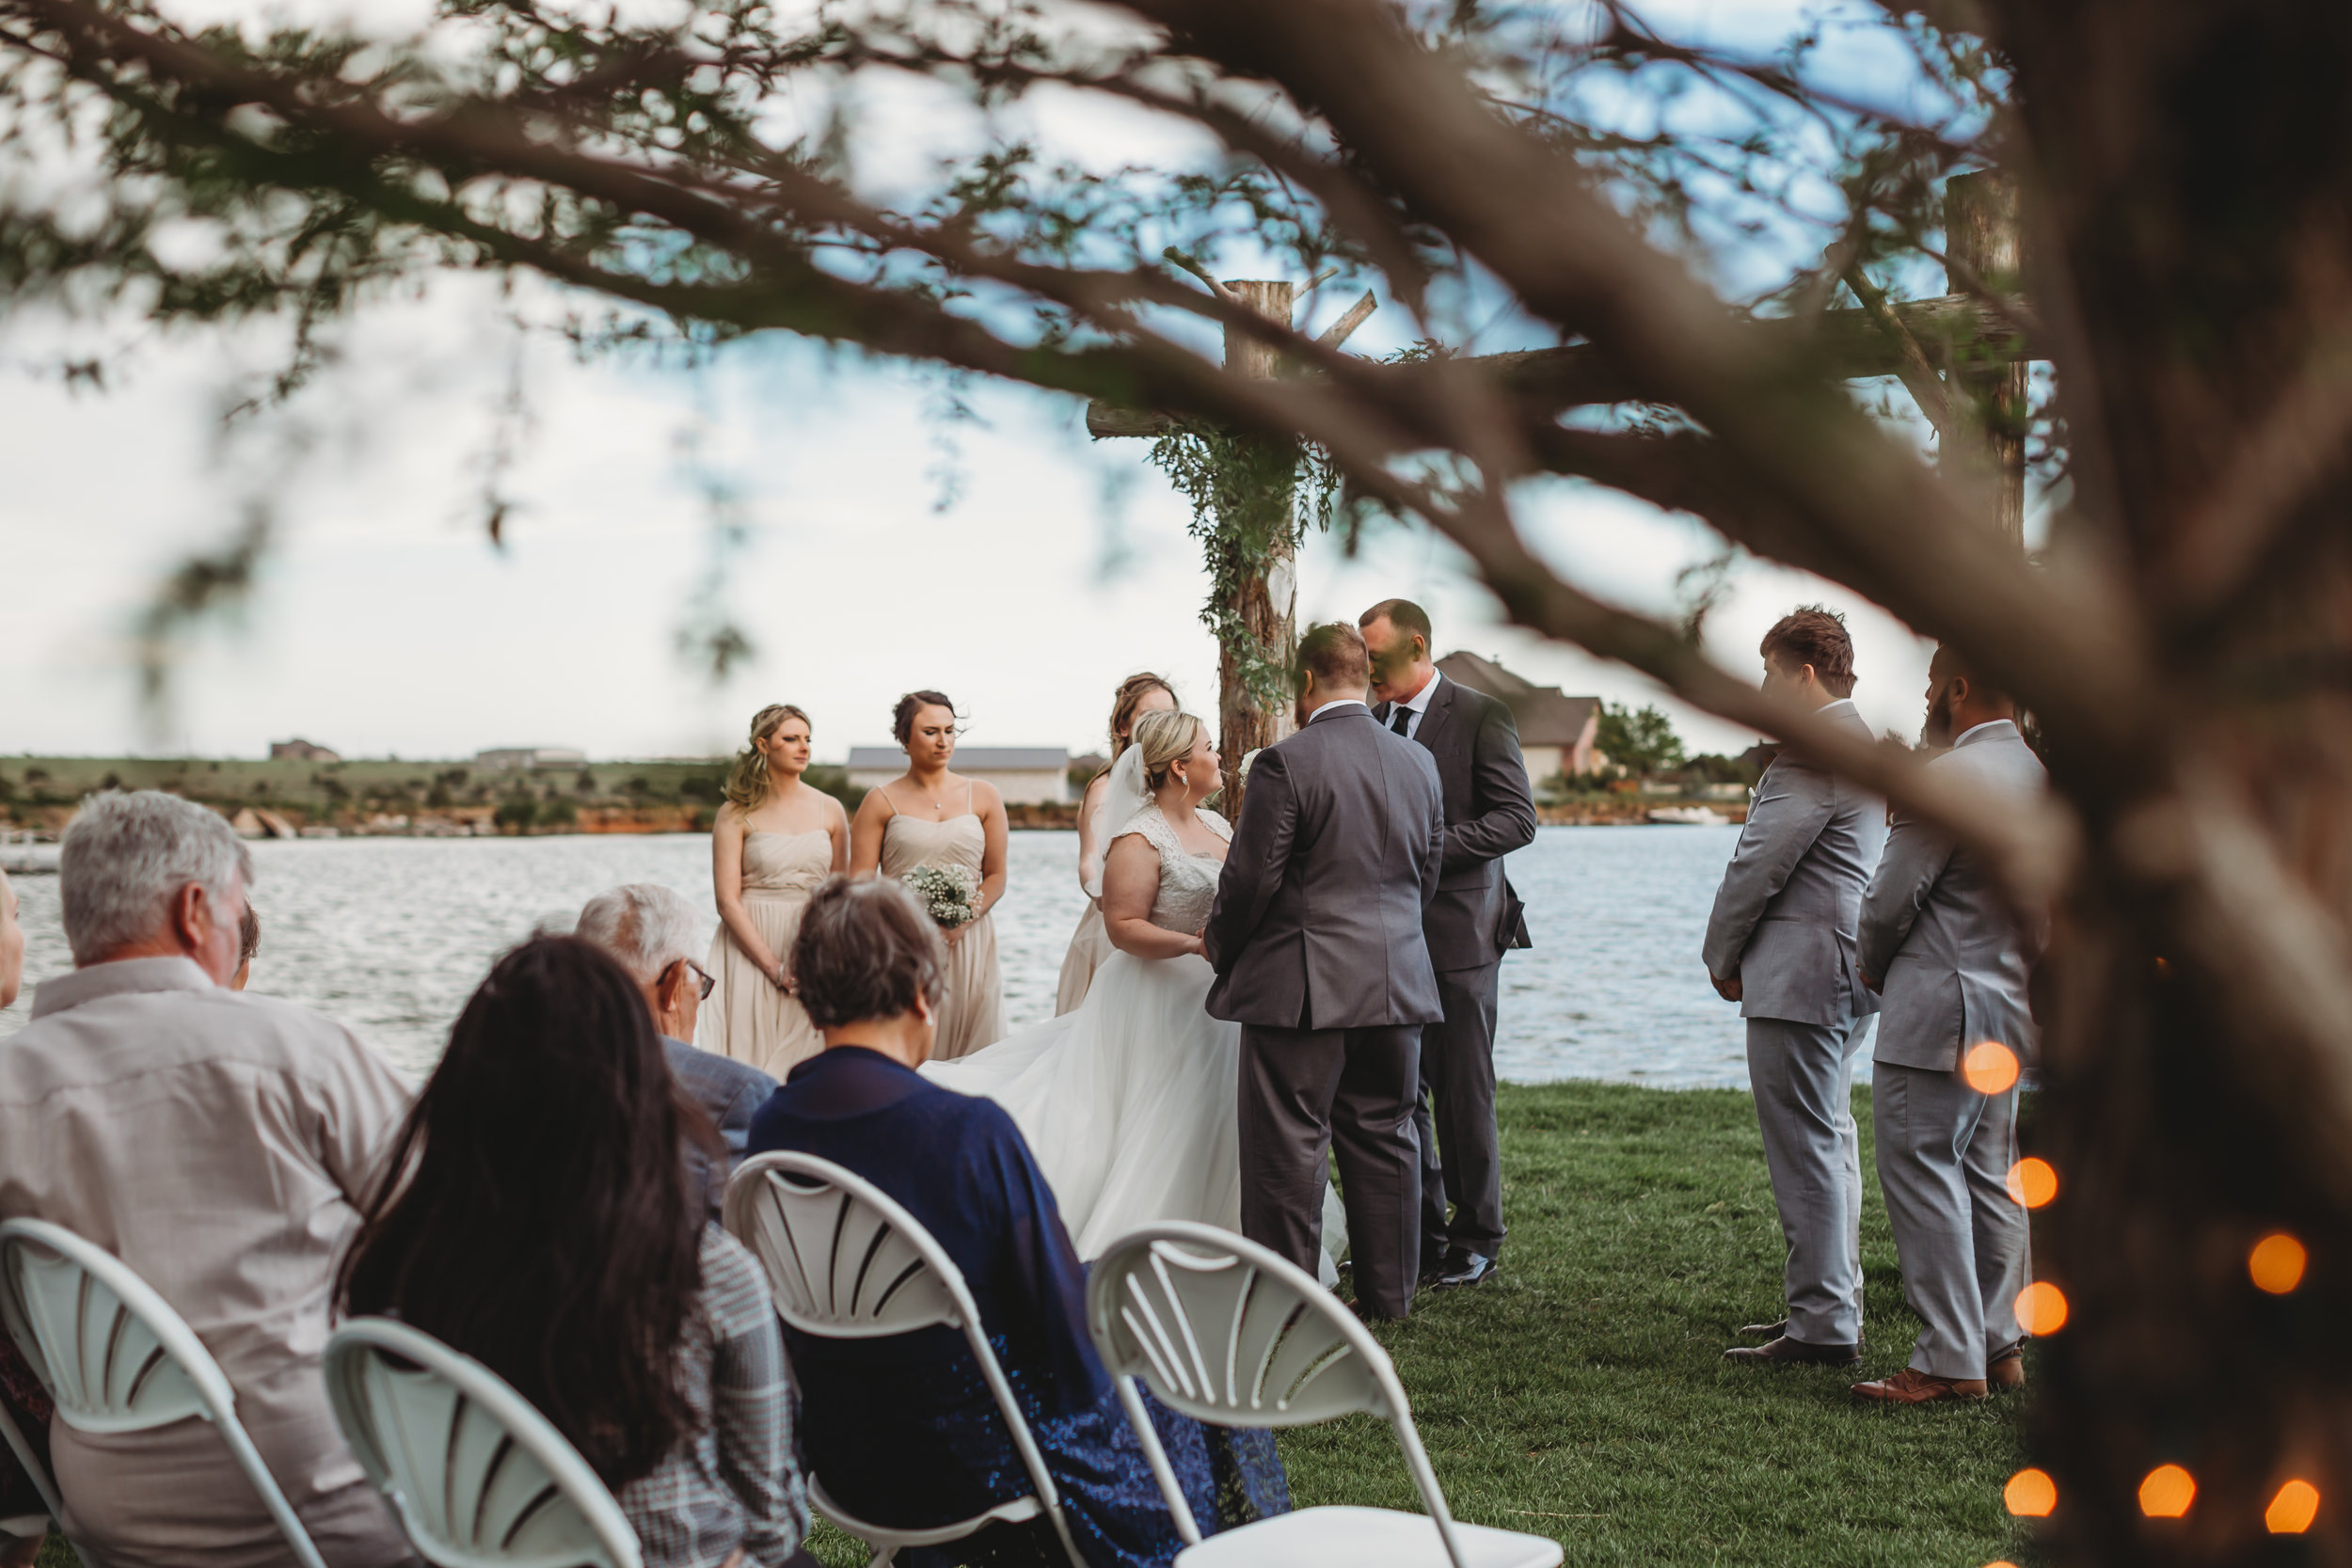  Intimate waterfront wedding ceremony with bridal party and guests #tealawardphotography #texasweddings #amarillophotographer #amarilloweddingphotographer #emotionalphotography #intimateweddingphotography #weddingday #weddingphotos #texasphotographer #inspiredwedding #intimatewedding #weddingformals #bigday #portraits 